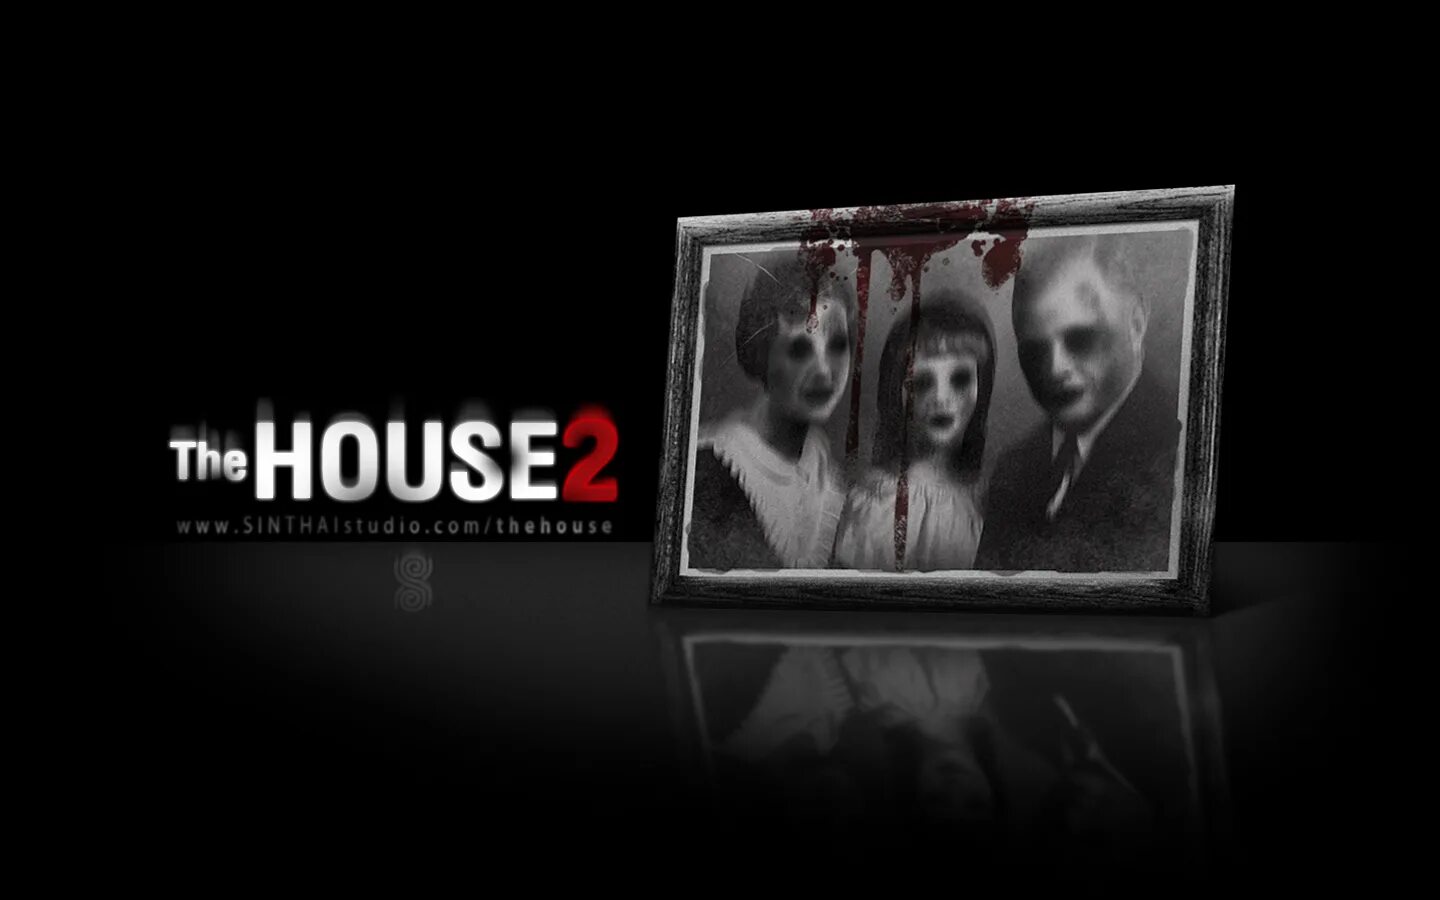 House 2 game